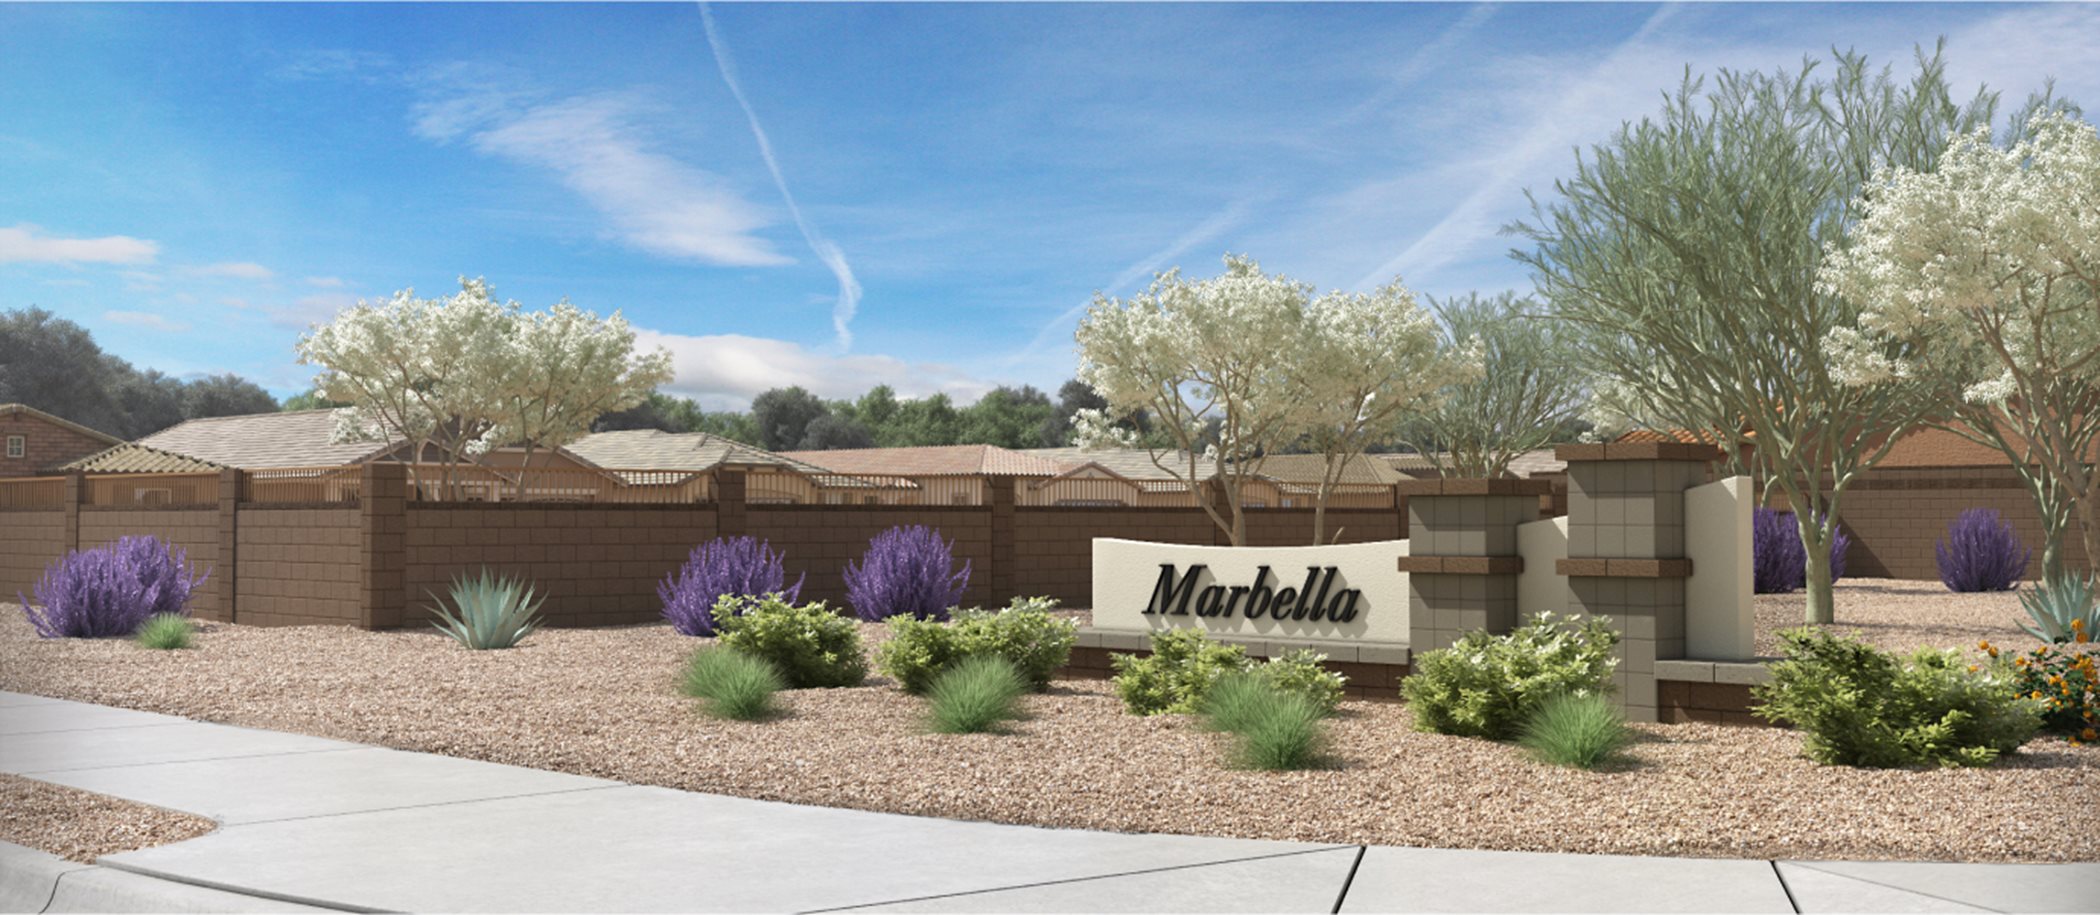 Marbella Ranch welcome monument in daylight